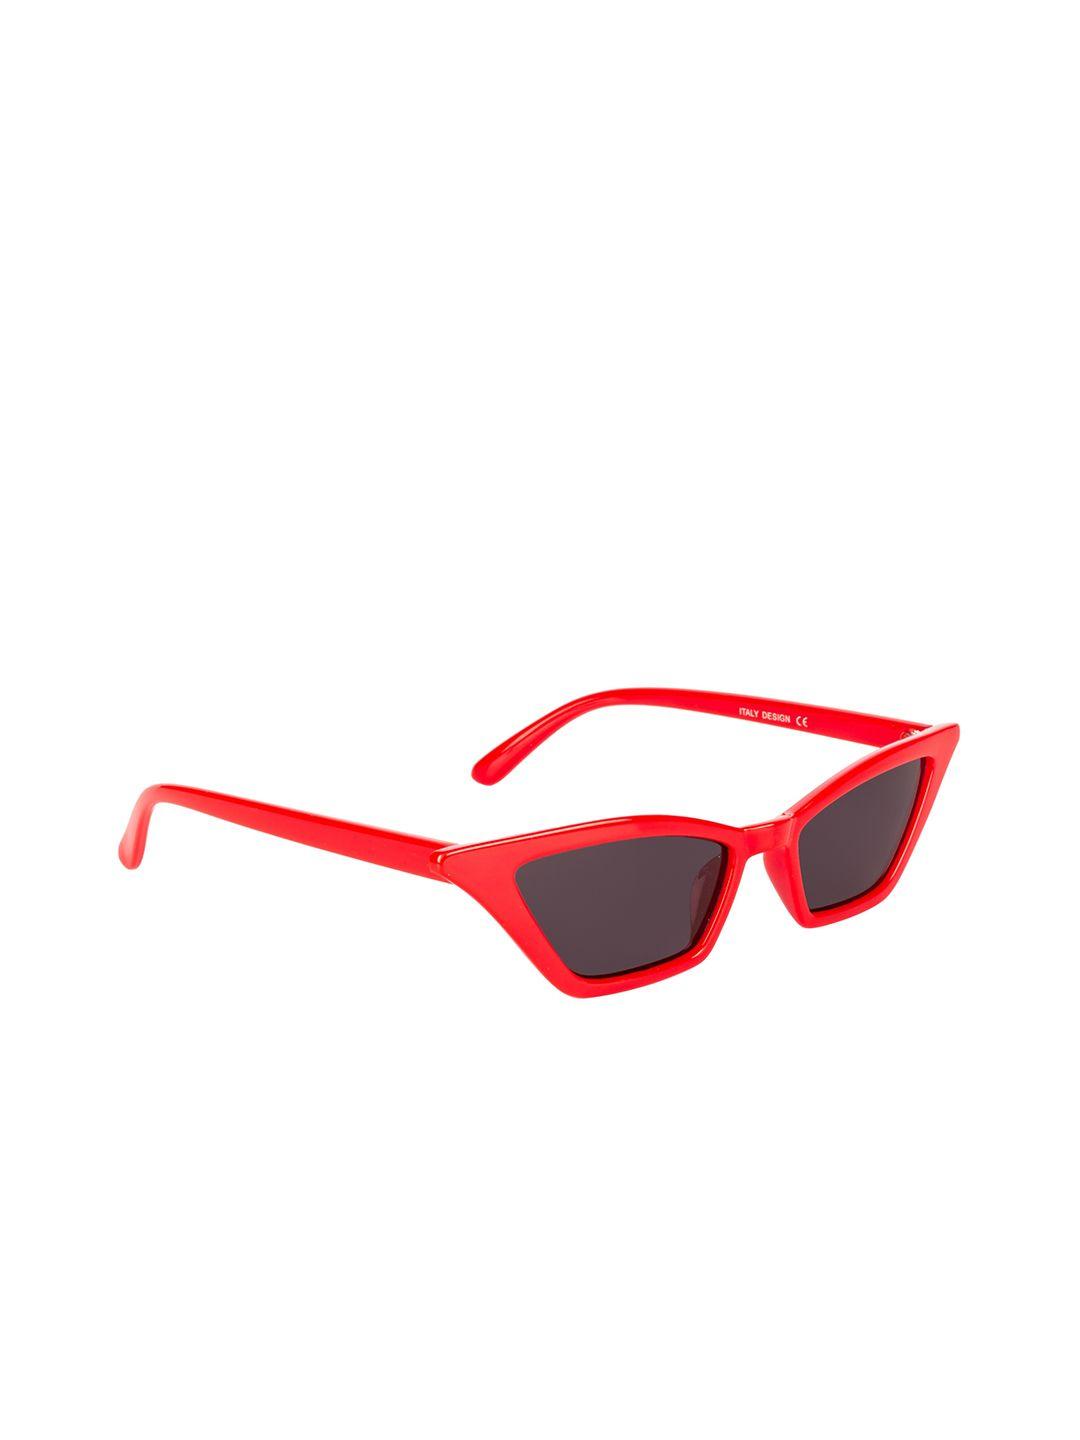 nuvew women black lens & red cateye sunglasses with uv protected lens